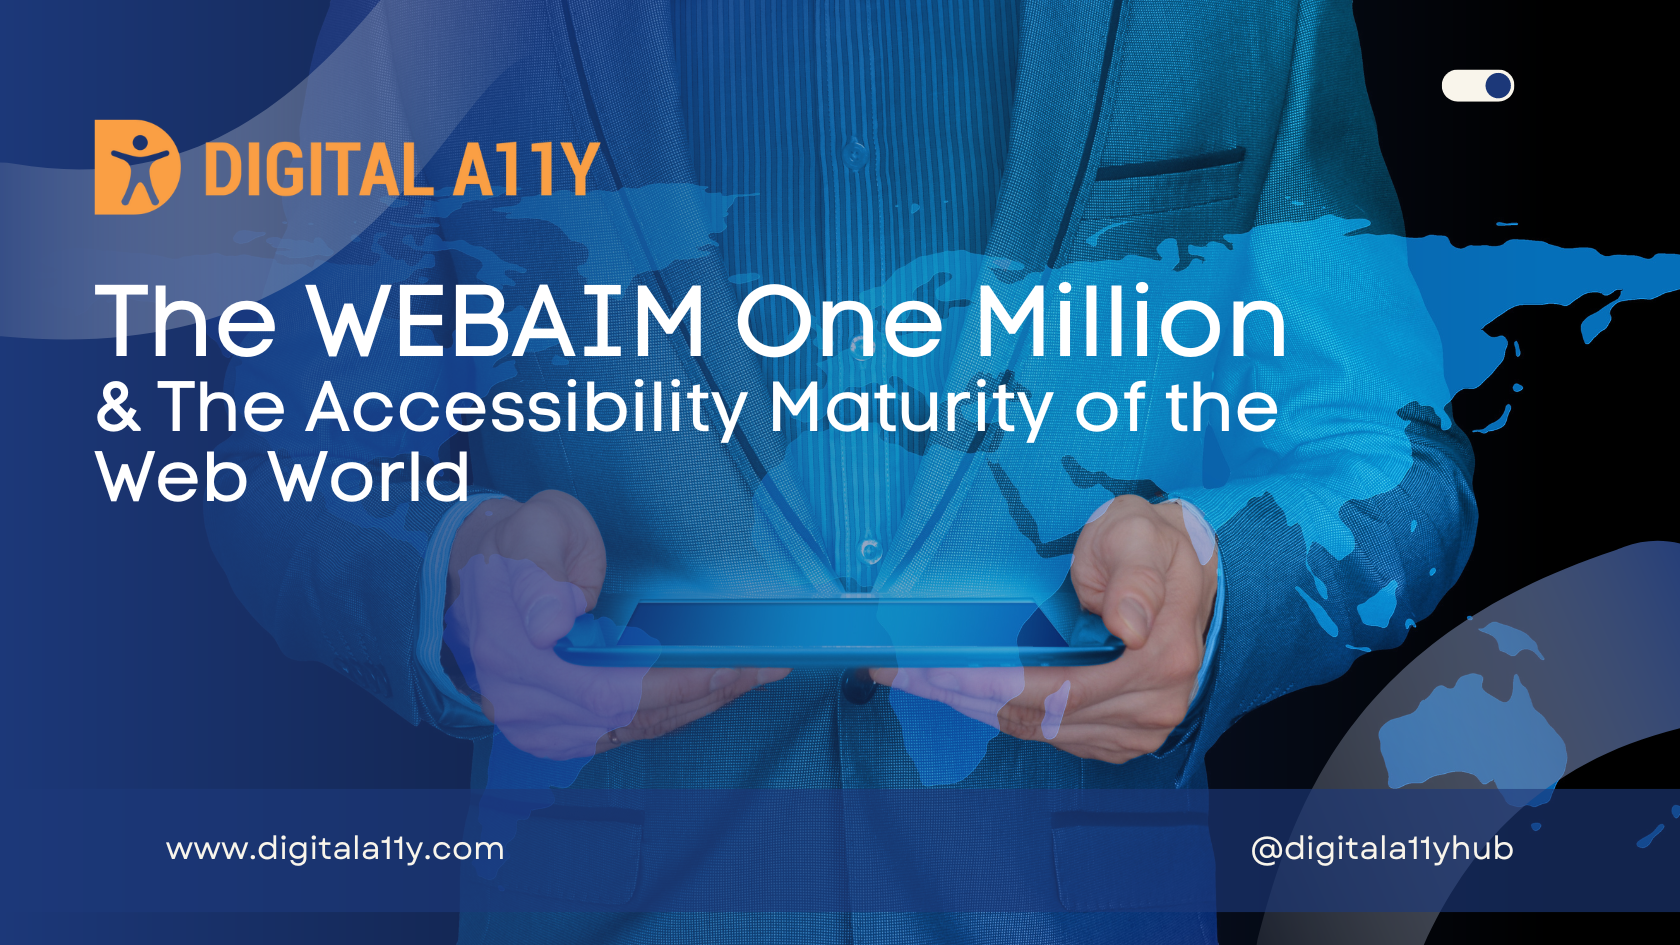 The WEBAIM One Million and The Accessibility Maturity of the Web World